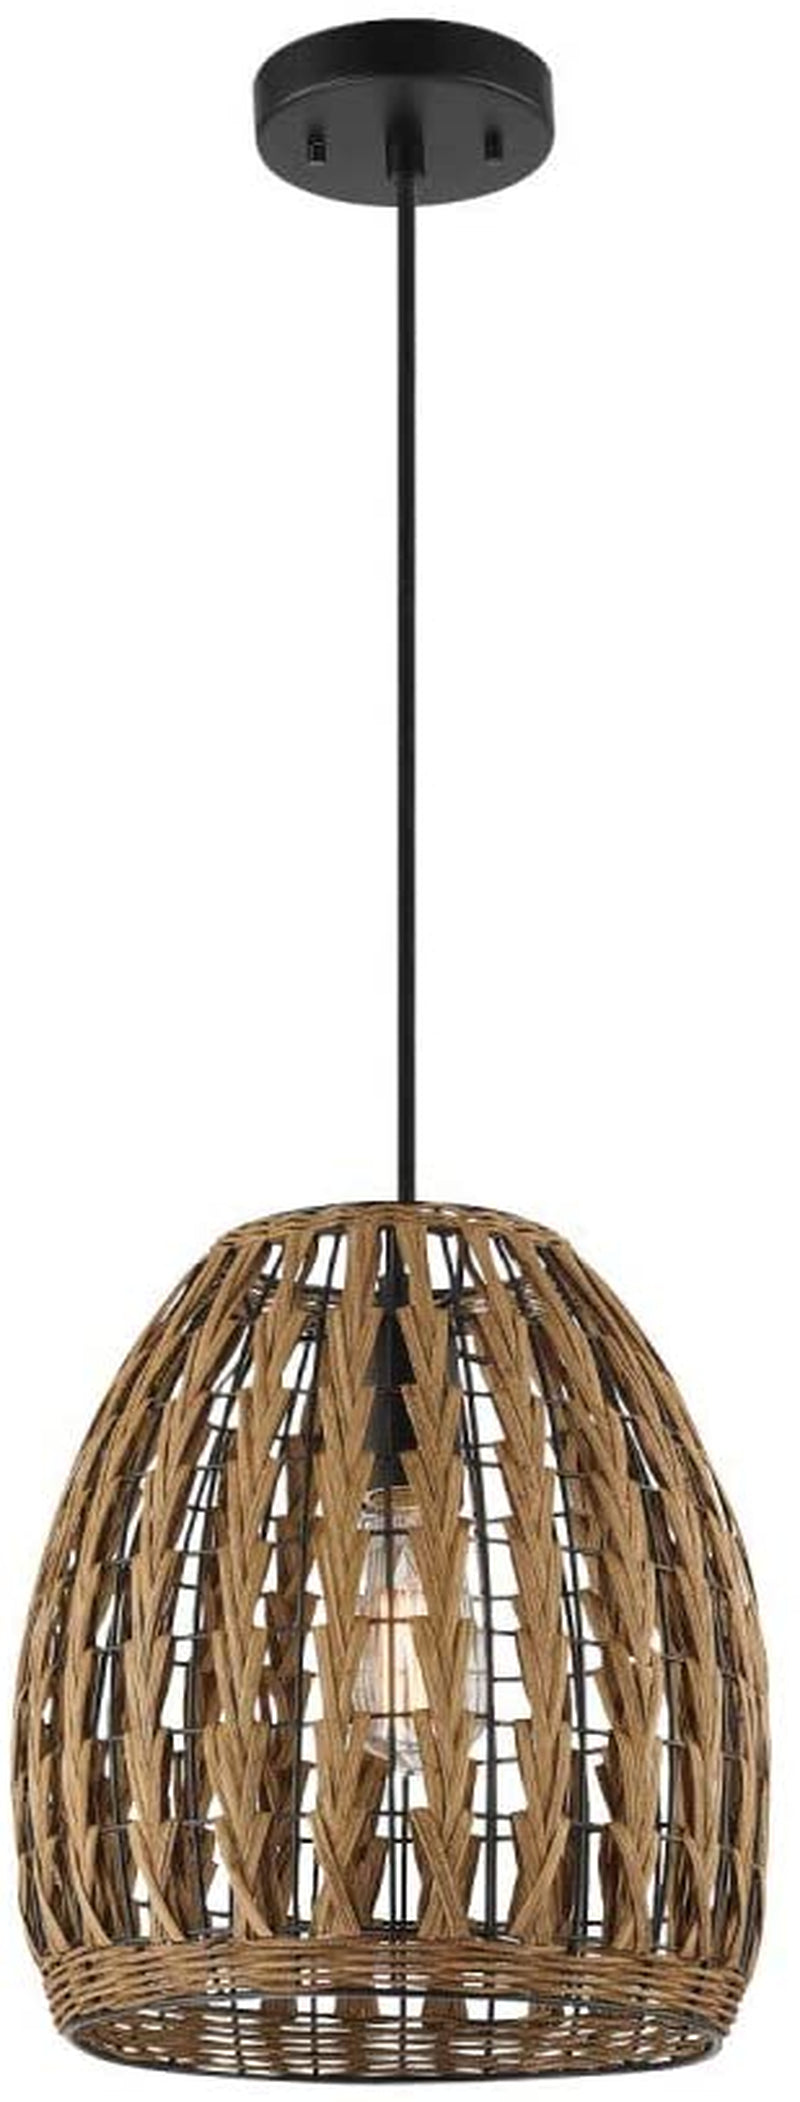 Globe Electric 61090 1-Light Pendant Light, Light Twine Shade, White Socket, White Cloth Hanging Cord, E26 Base Socket, Kitchen Island, Pendant Light Fixture, Adjustable Height, Home Décor Lighting Home & Garden > Lighting > Lighting Fixtures Globe Electric Marlow Without Bulb 